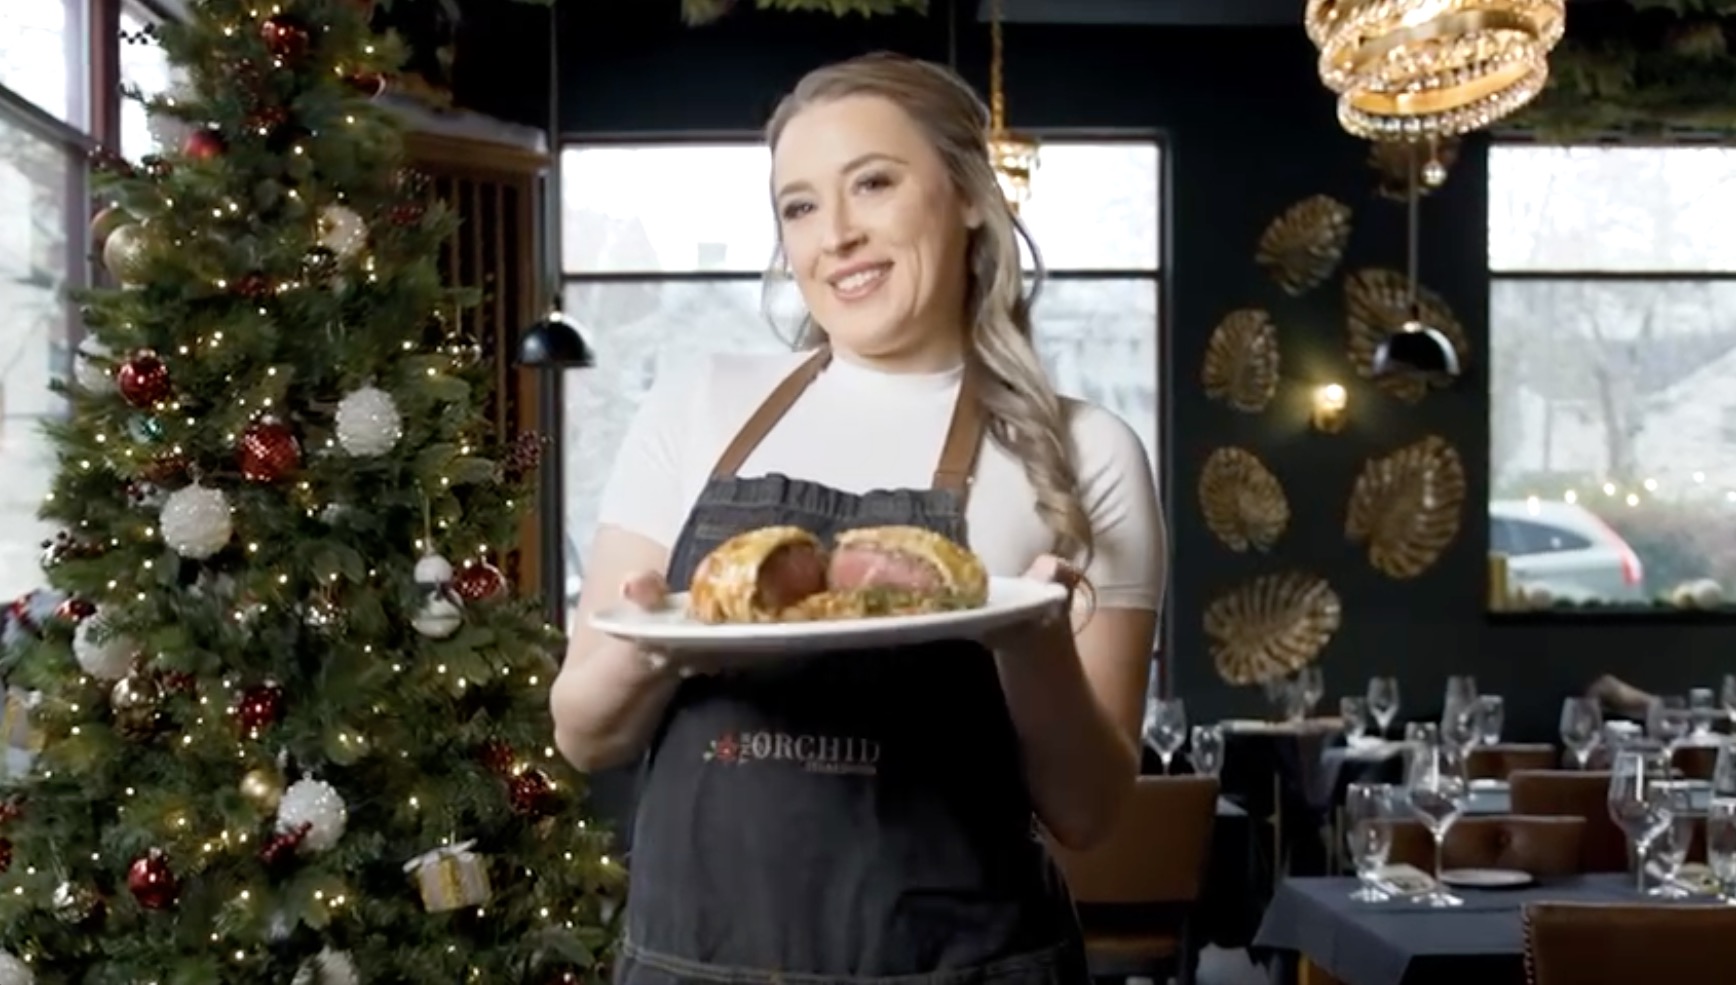 Model takes on Gordon Ramsay’s famous beef wellington and tells top chef to ‘watch out’